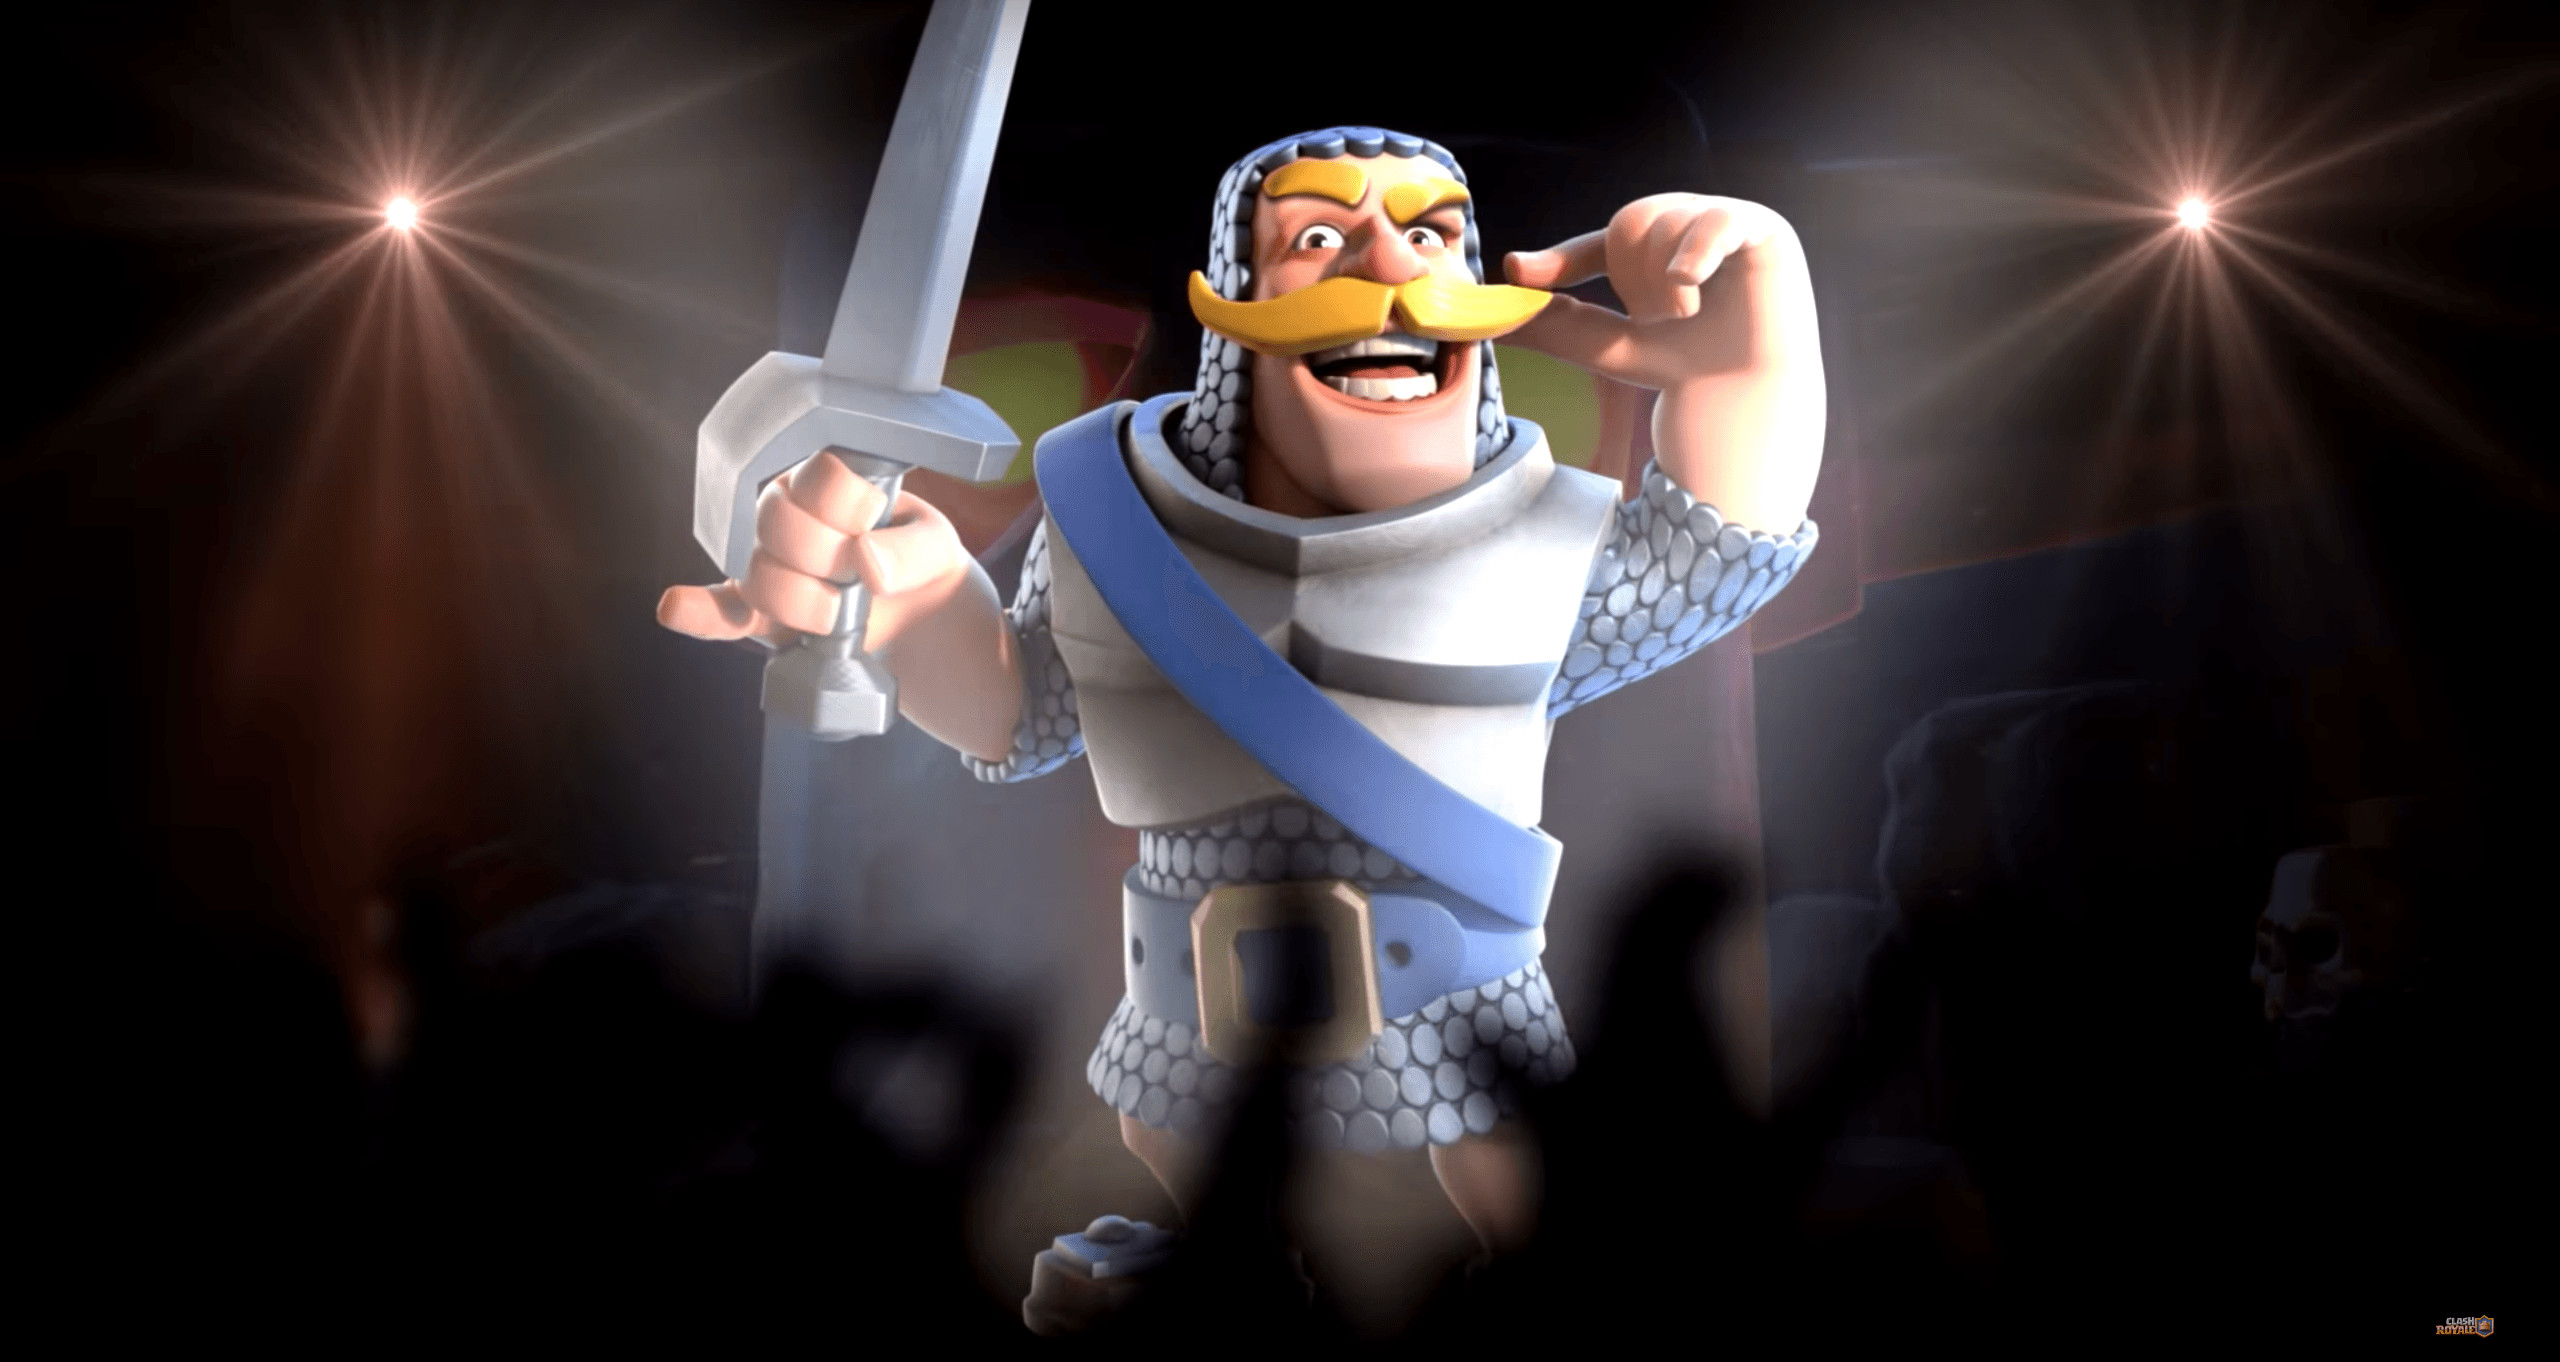 Clash Royale Wallpapers (80+ images)